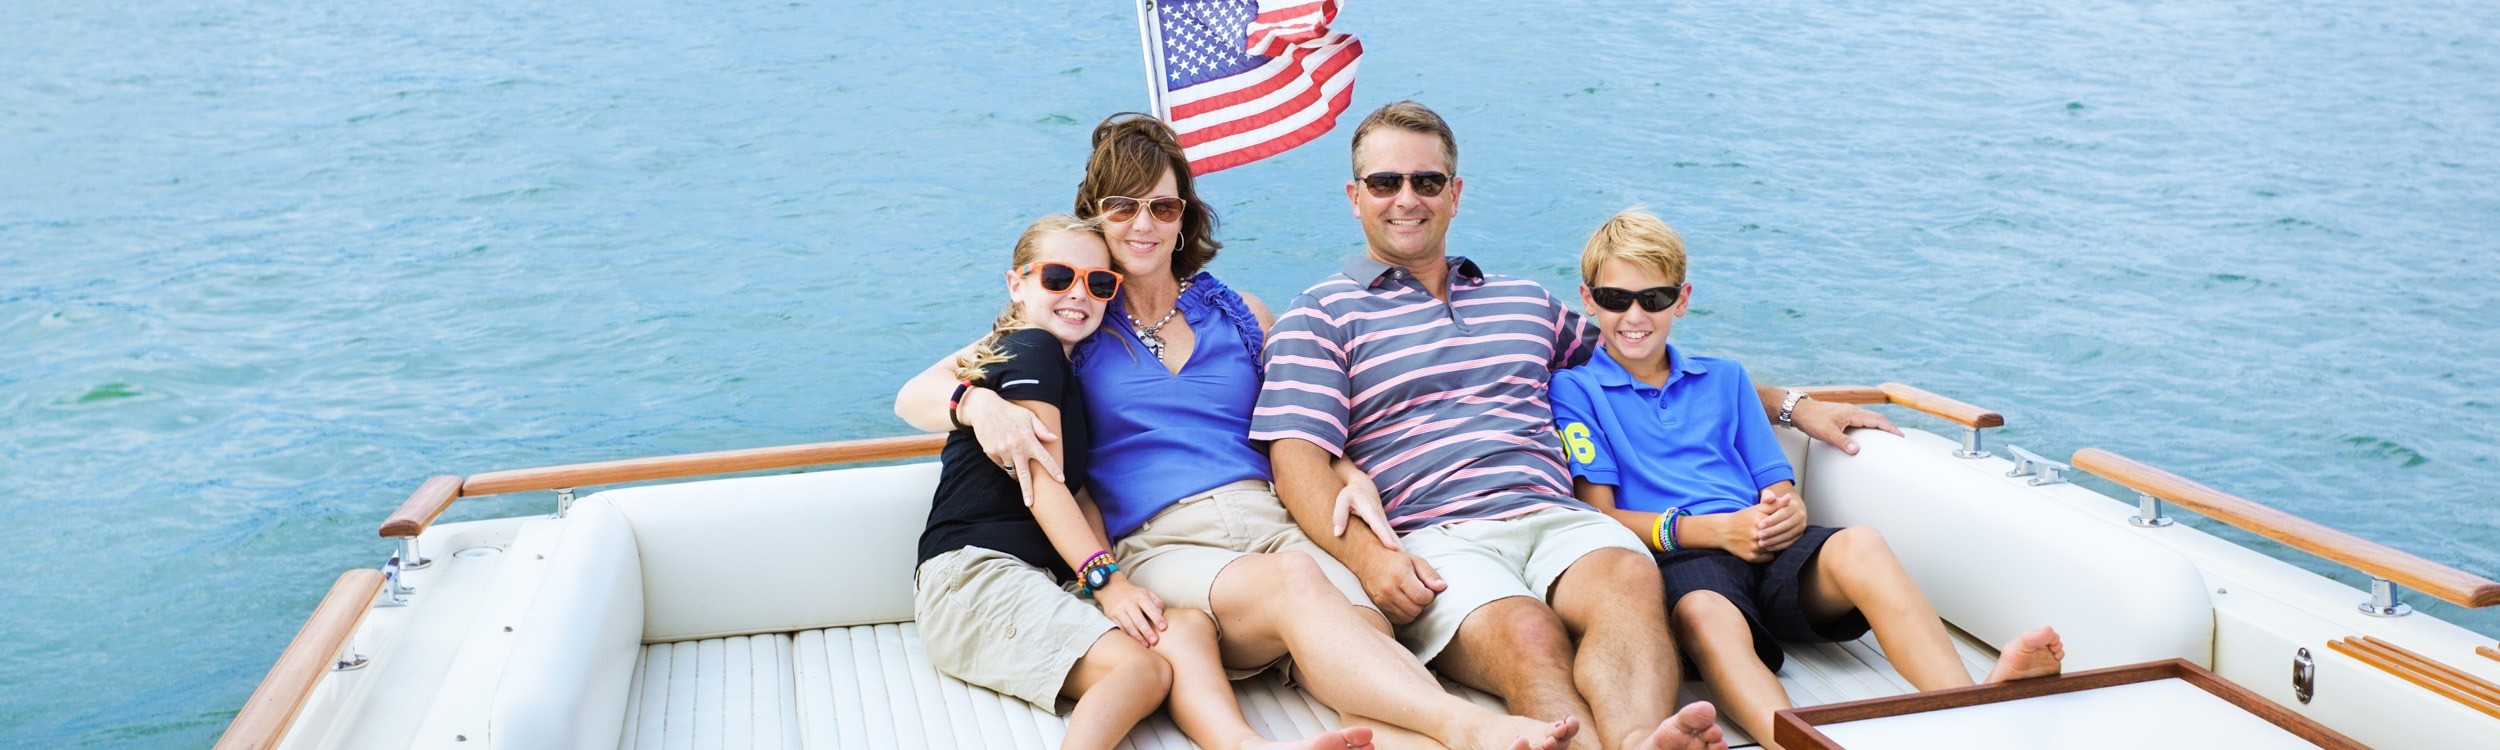 smiling family of 4 sitting together on a boat